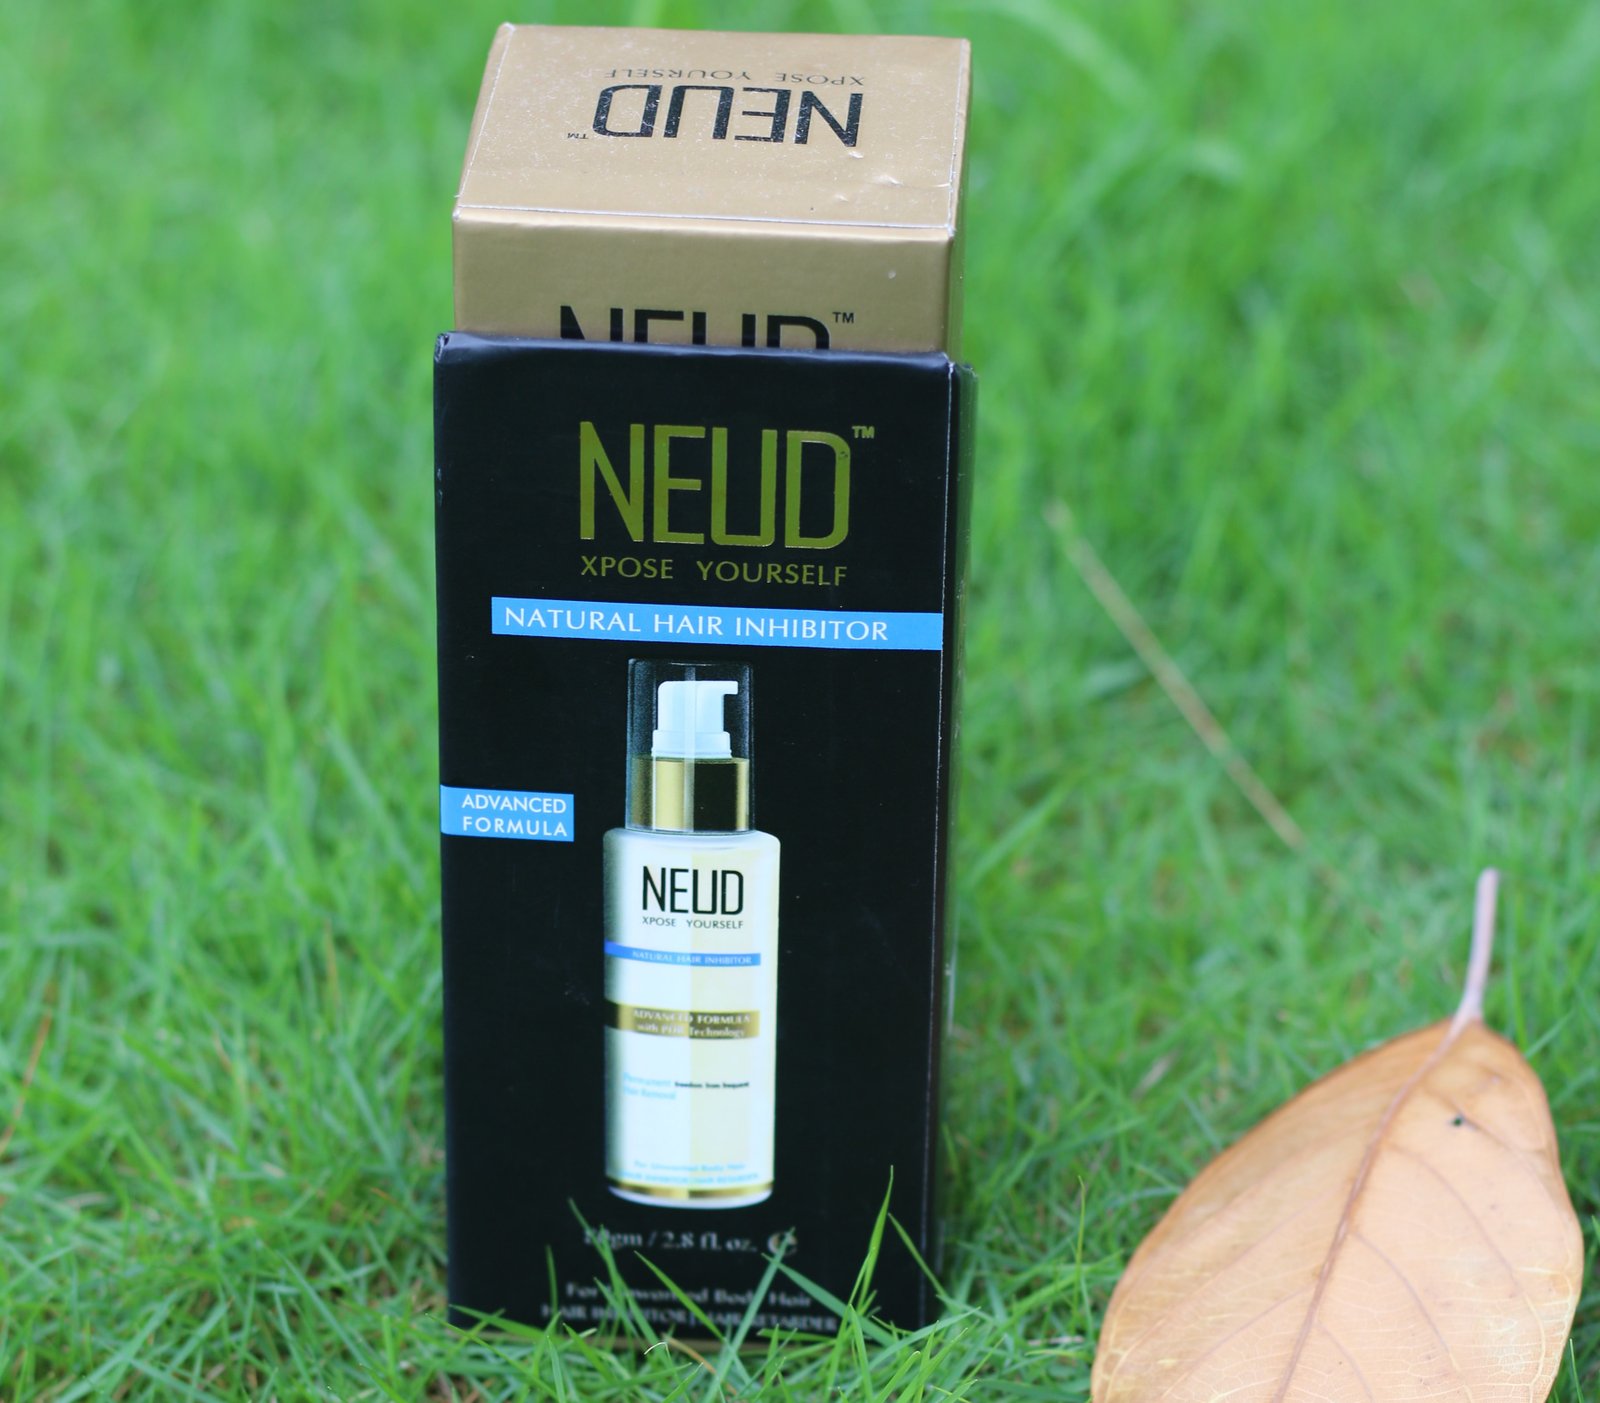 NEUD Natural Hair Inhibitor Review | Pros, Cons And How To Use